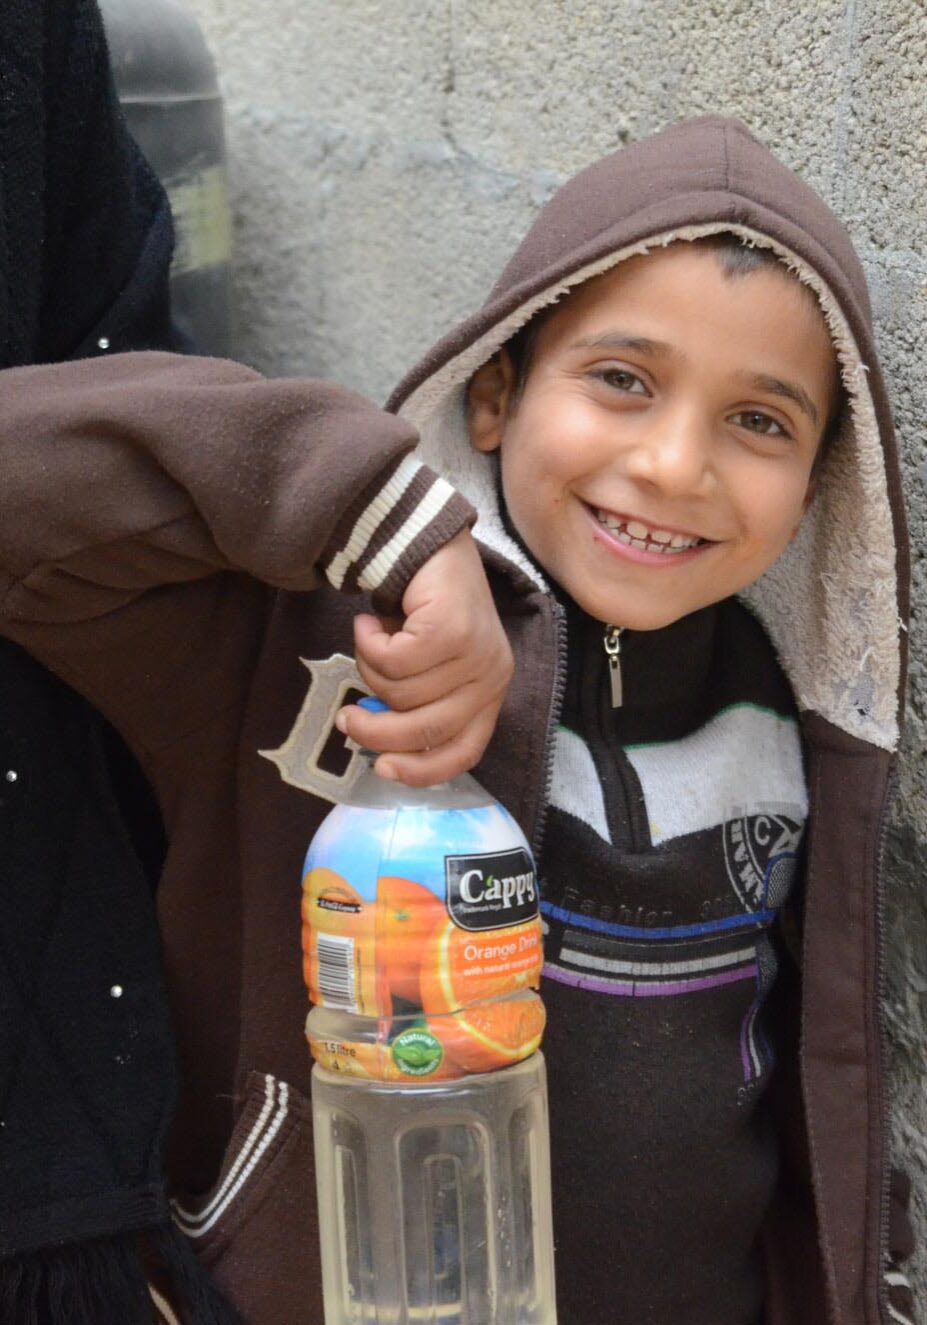 We're restoring water for Gaza families, like Mohanad's and Fatima's.